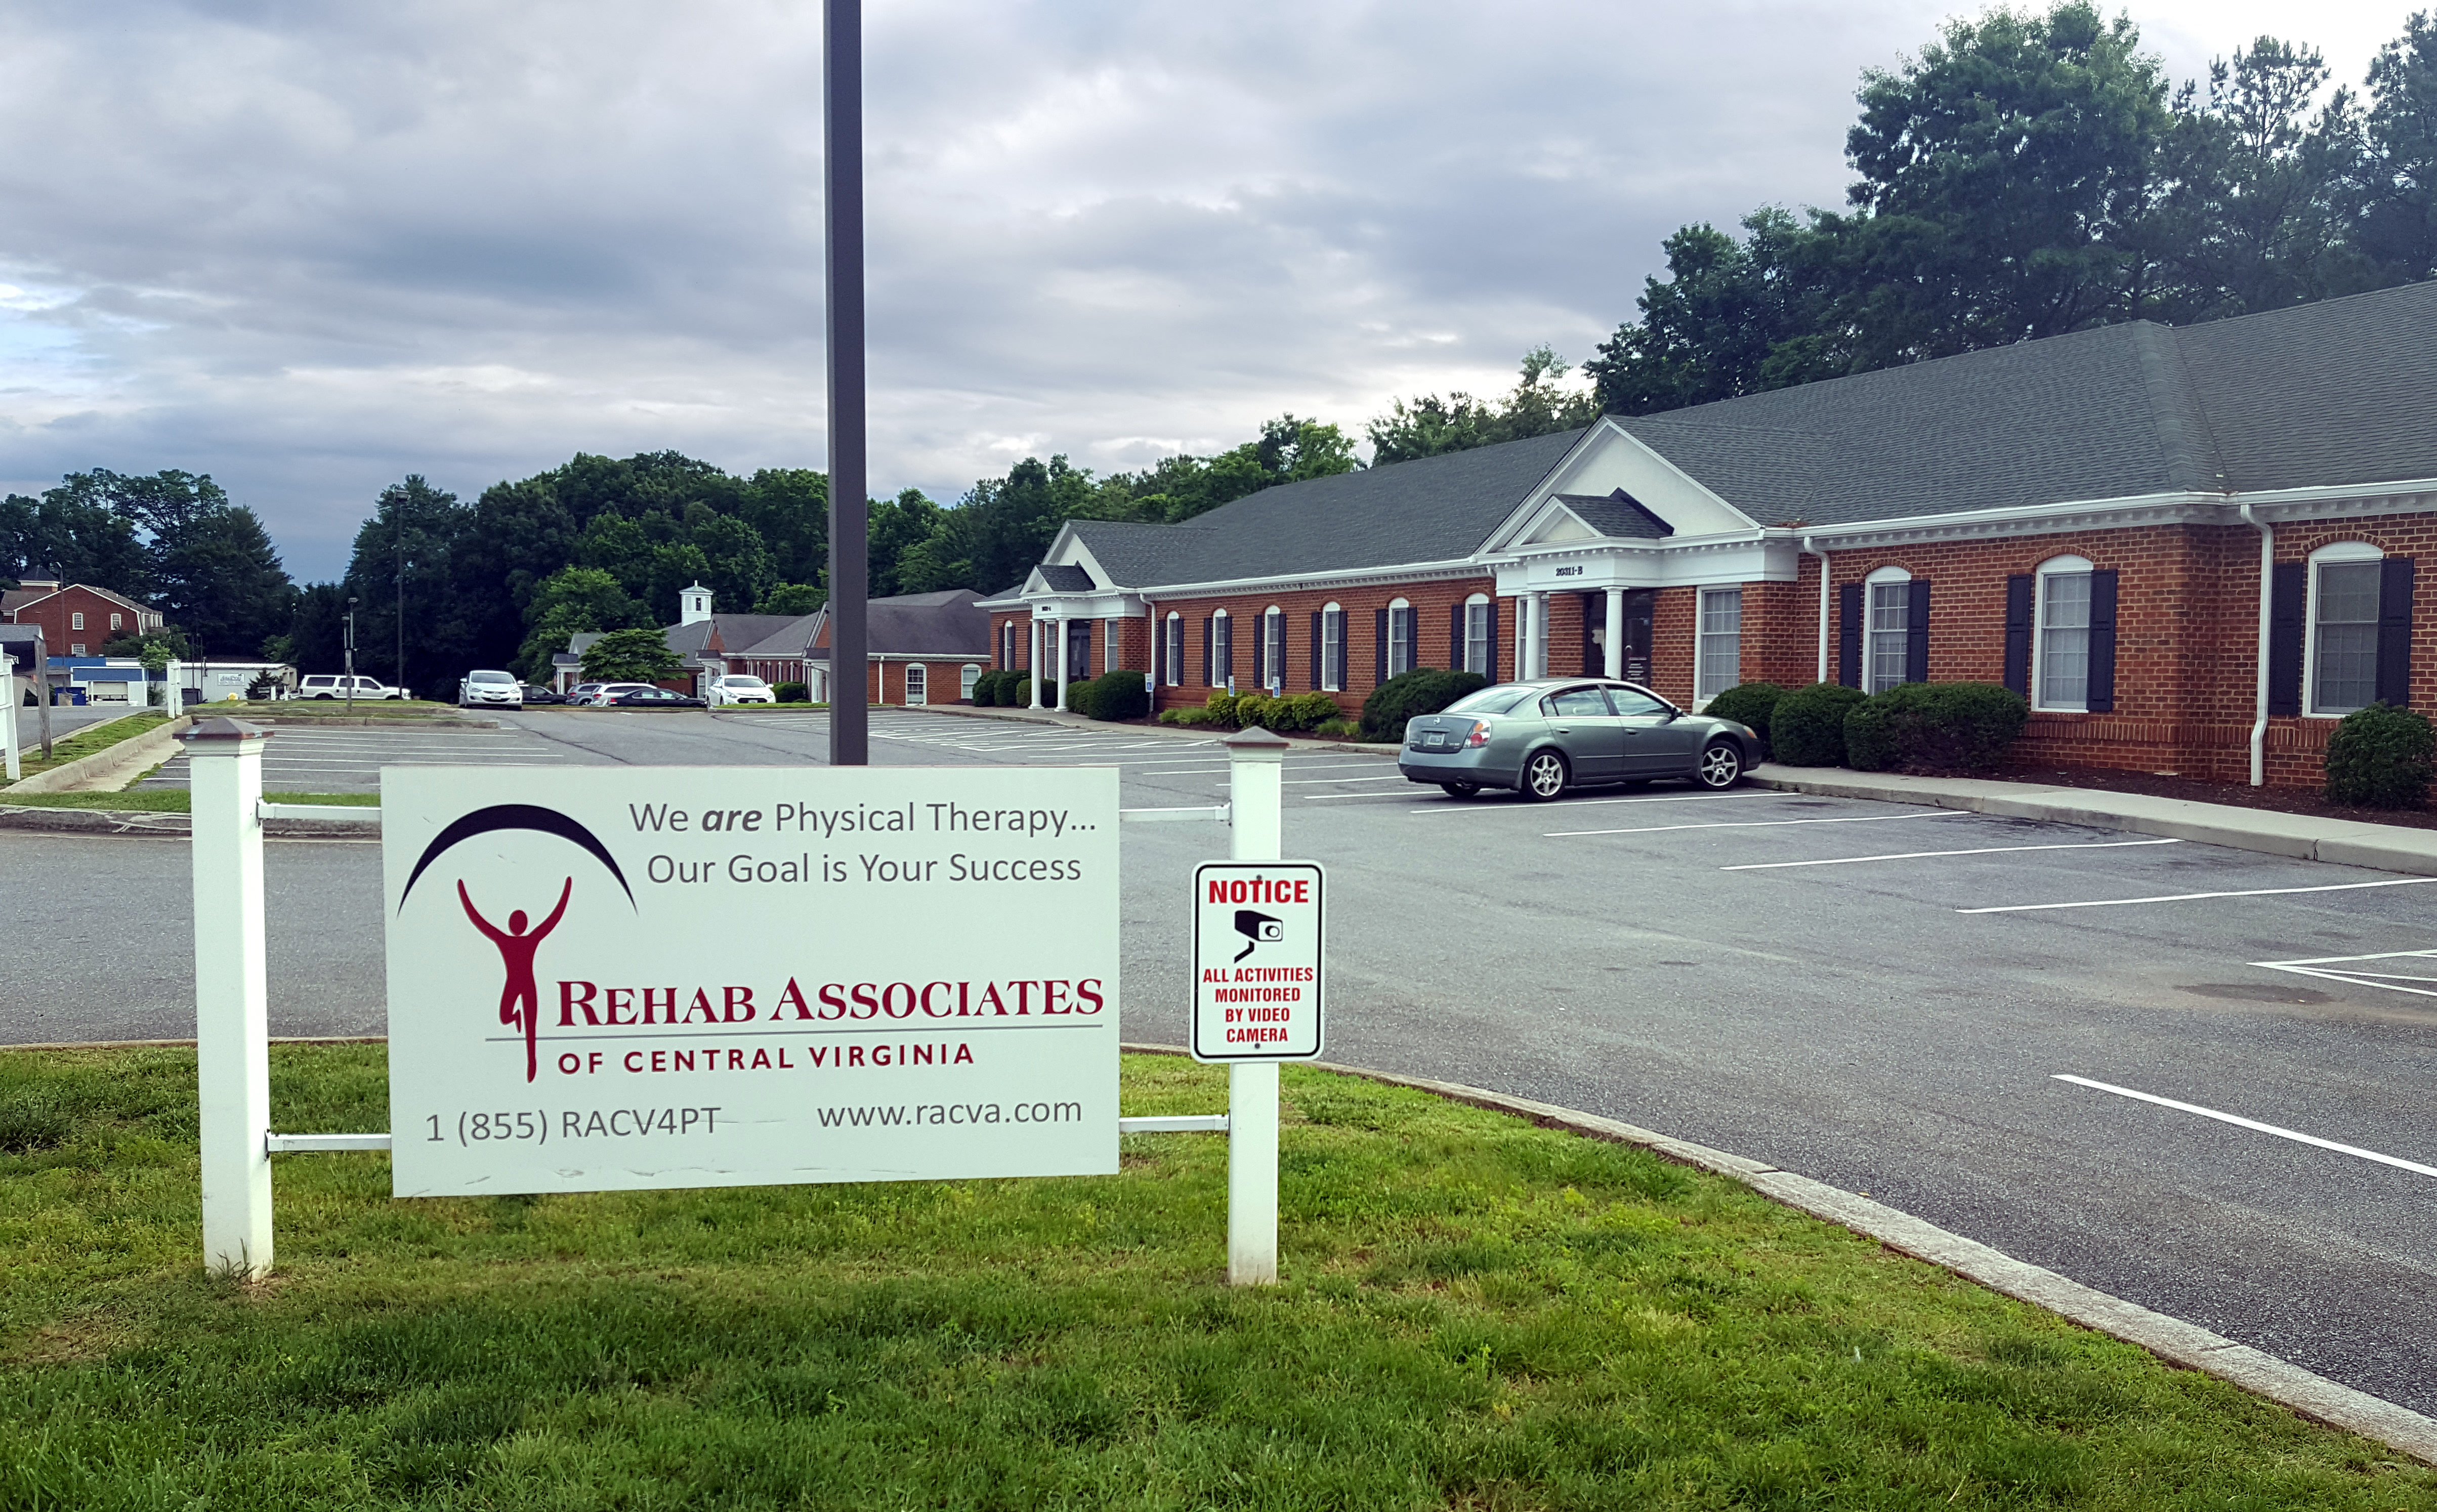 Rehab Associates of Central Virginia Timberlake Practice specializes in Orthopedics, Manual Therapy, Sports Medicine, Orthotics, Concussion Rehabilitation, Runner and Triathlete Programs